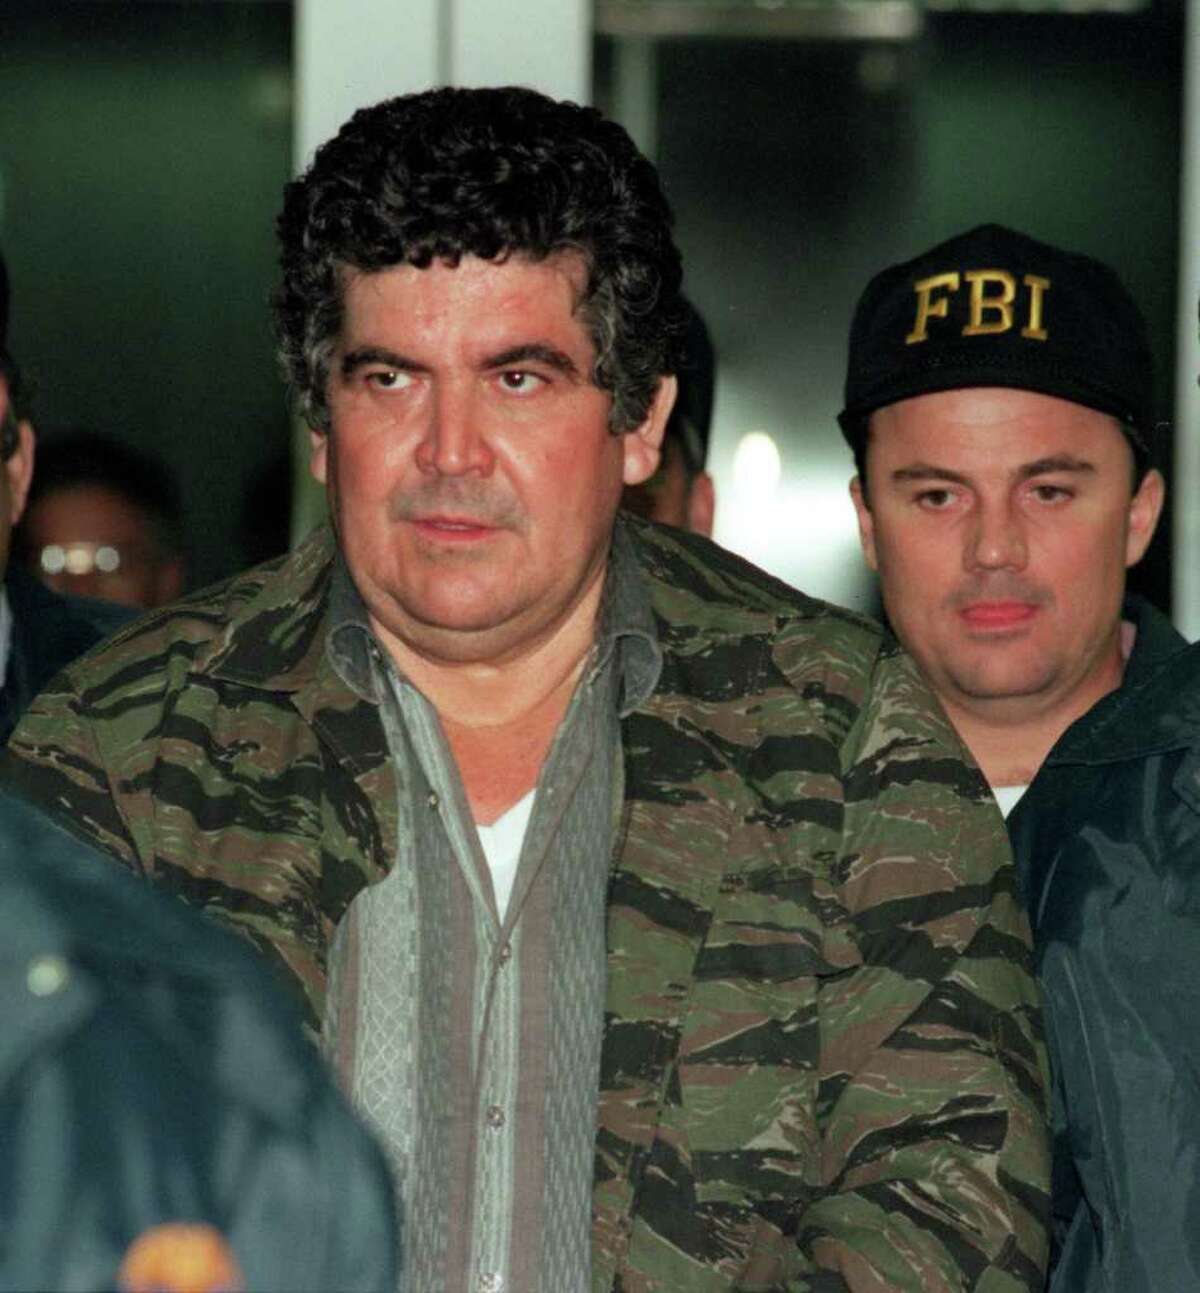 Juan García Abrego, known as “El Señor” among many nicknames, once the godfather of Cardenas’ Gulf Cartel. A U.S. citizen, he was flown to the United States and convicted on conspiracy, drug trafficking and money laundering charges in Houston in 1996; serving multiple life sentences at the Colorado supermax.